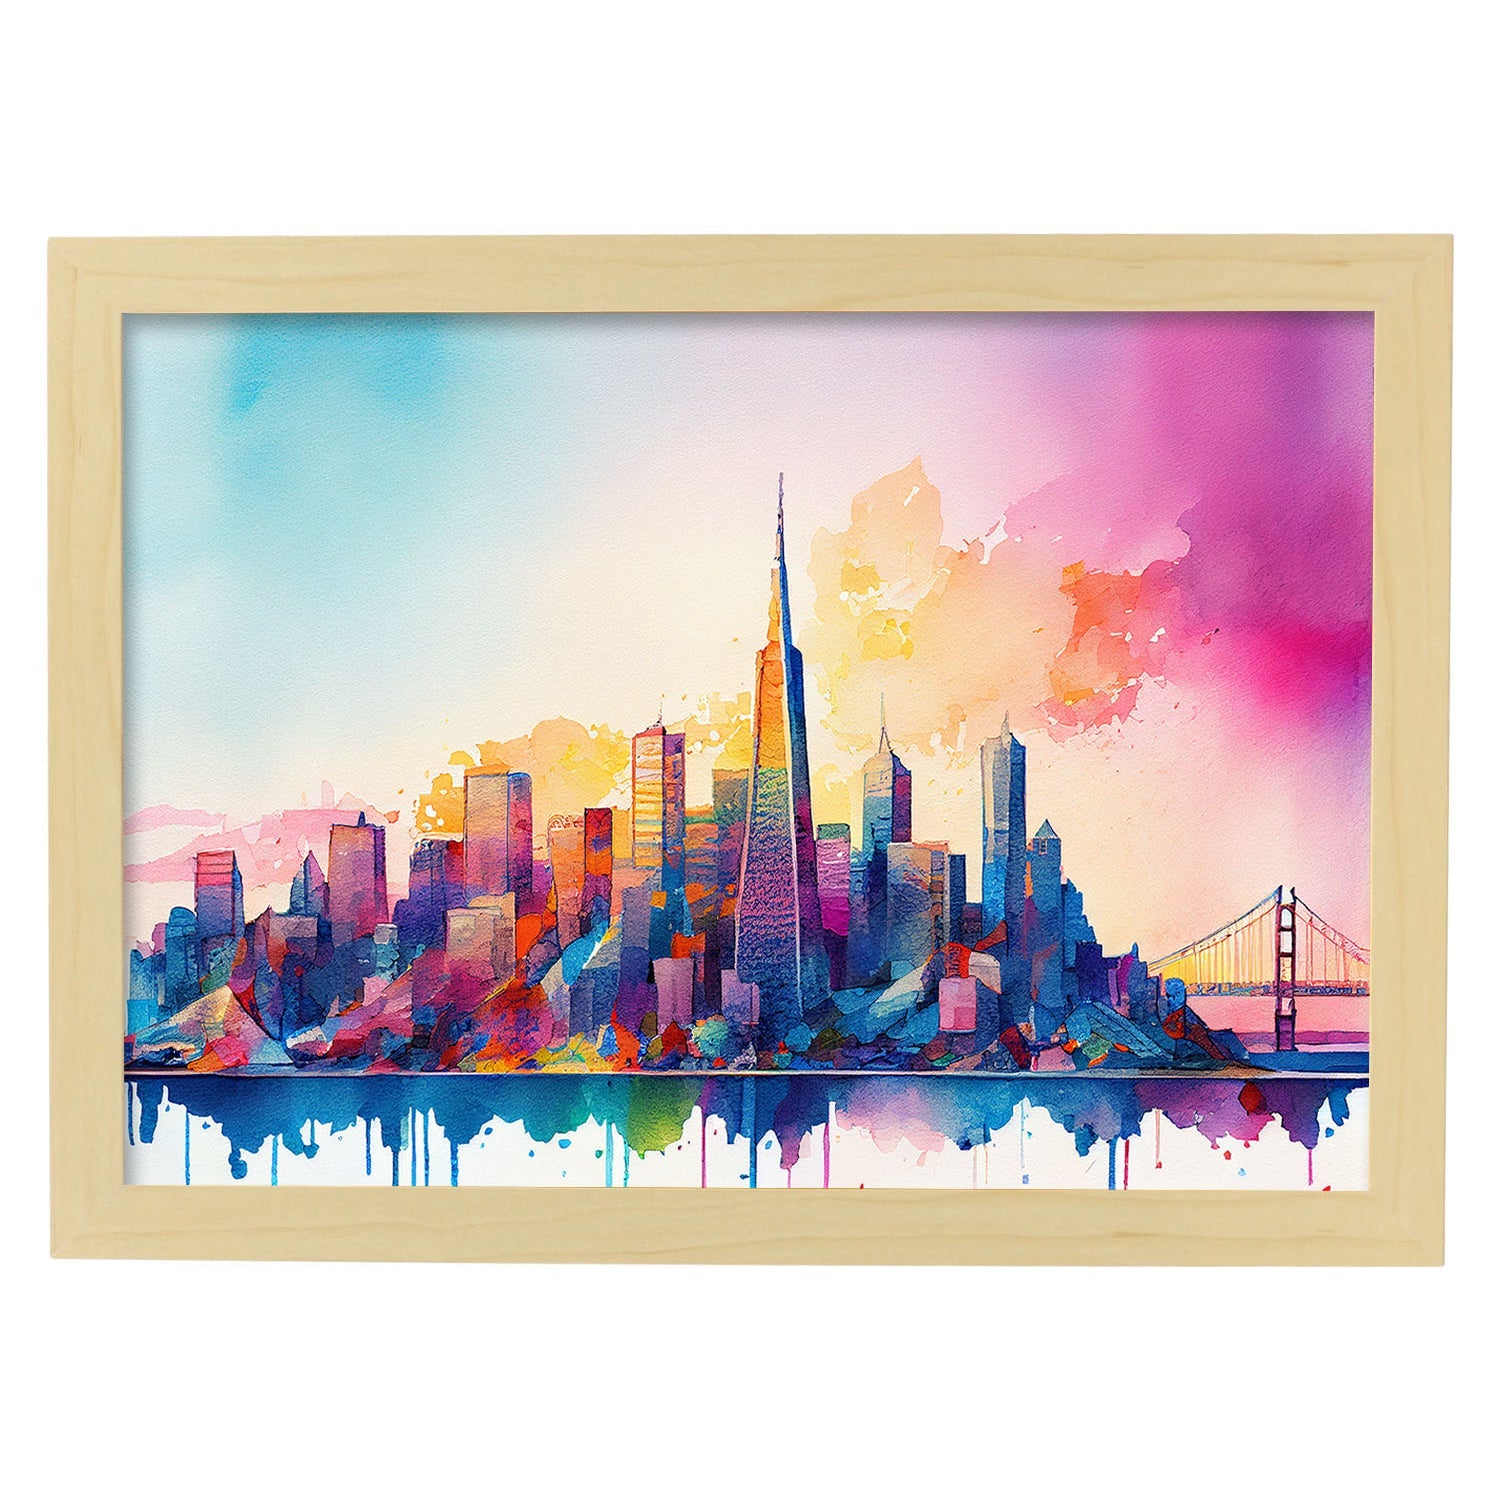 Nacnic watercolor of a skyline of the city of San Francisco. Aesthetic Wall Art Prints for Bedroom or Living Room Design.-Artwork-Nacnic-A4-Marco Madera Clara-Nacnic Estudio SL